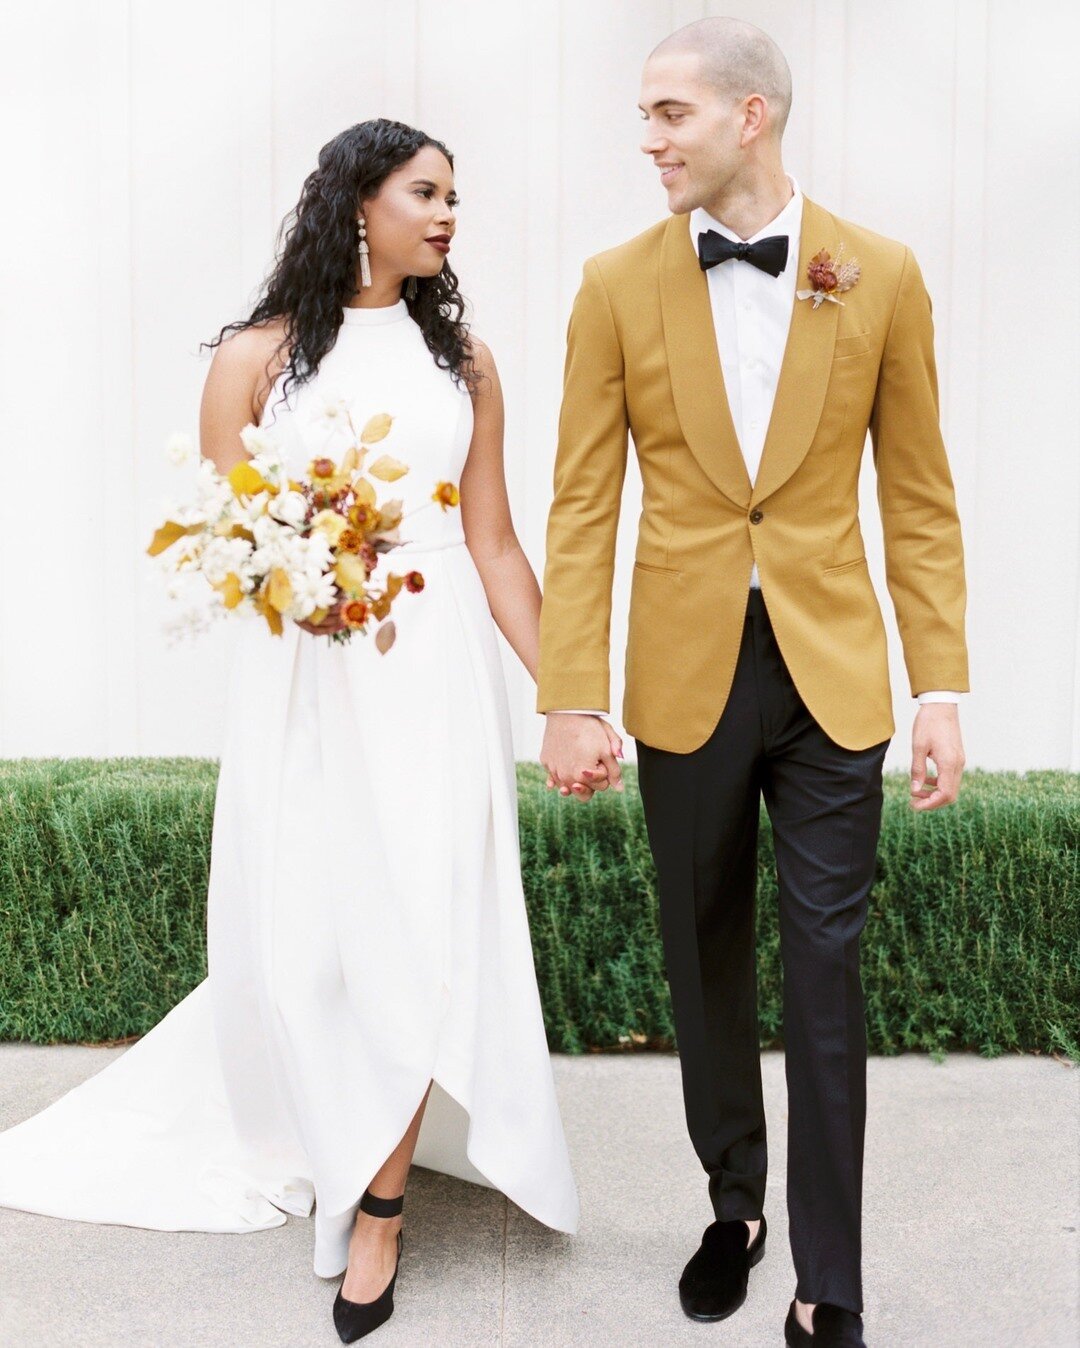 When the bride and groom's style complement each other perfectly. ⠀⠀⠀⠀⠀⠀⠀⠀⠀
⠀⠀⠀⠀⠀⠀⠀⠀⠀
Planning + Design: @ericaestradadesign ⠀⠀⠀⠀⠀⠀⠀⠀⠀
Photo by: @elliekoleen ⠀⠀⠀⠀⠀⠀⠀⠀⠀
Florals: @arvofloralstudio ⠀⠀⠀⠀⠀⠀⠀⠀⠀
Tux: @theblacktux